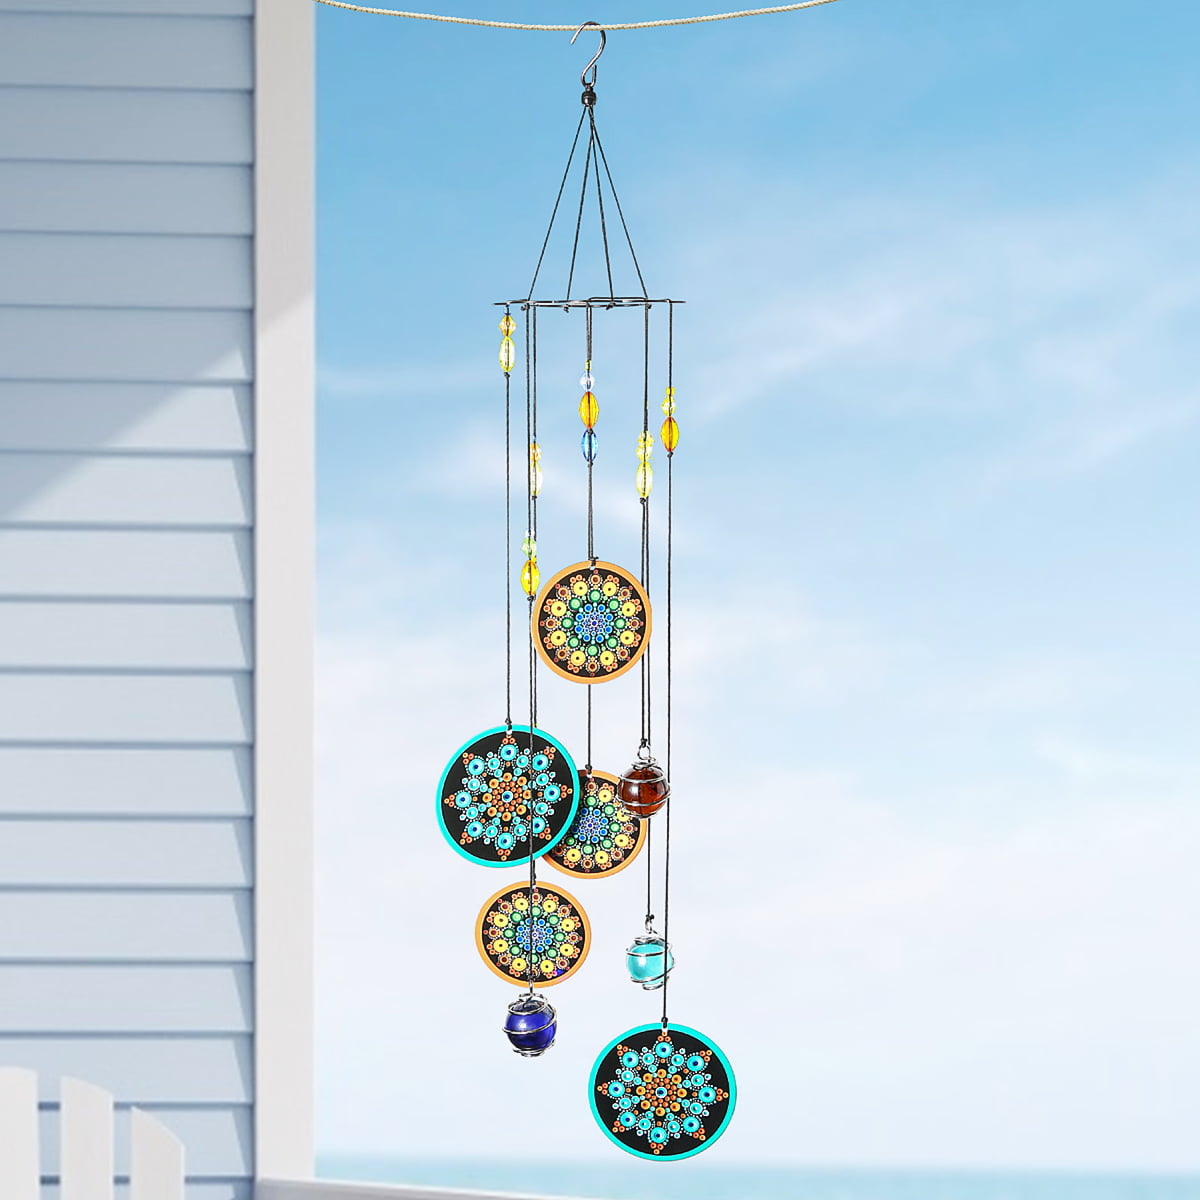 Wind outside chimes to where hang Where to